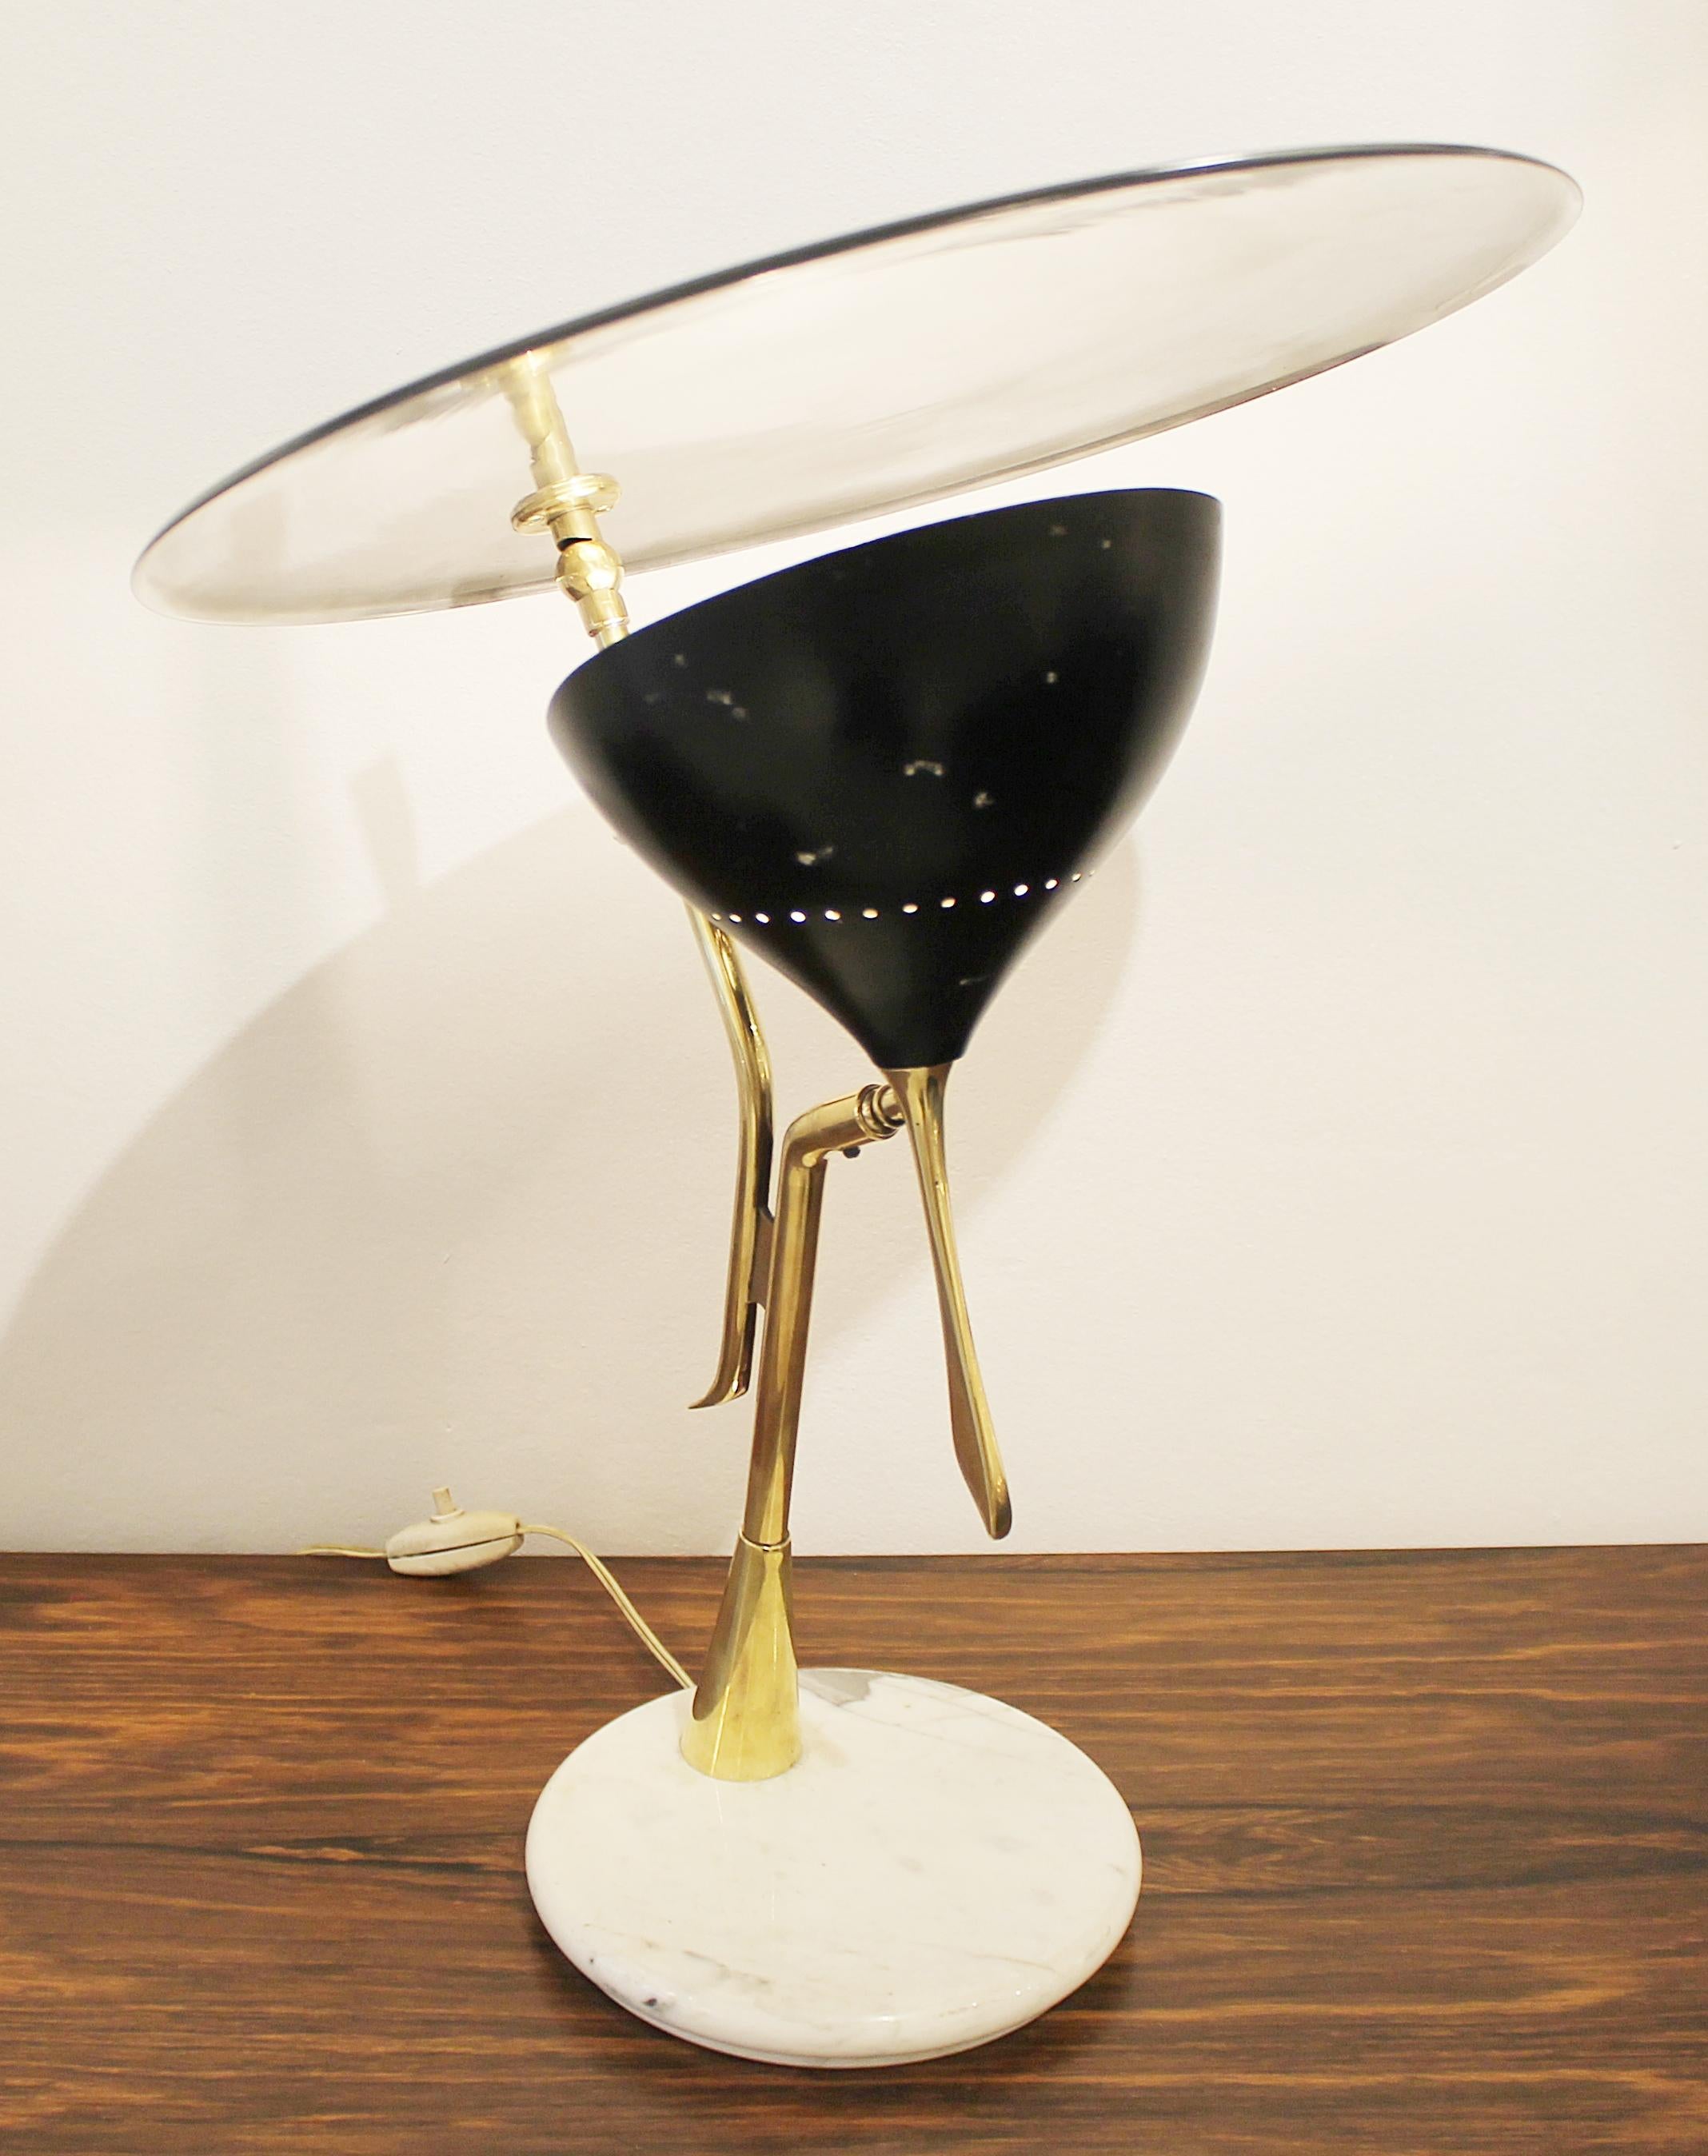 Lumen Milano table lamp in brass and marble, Italy, 1950s.